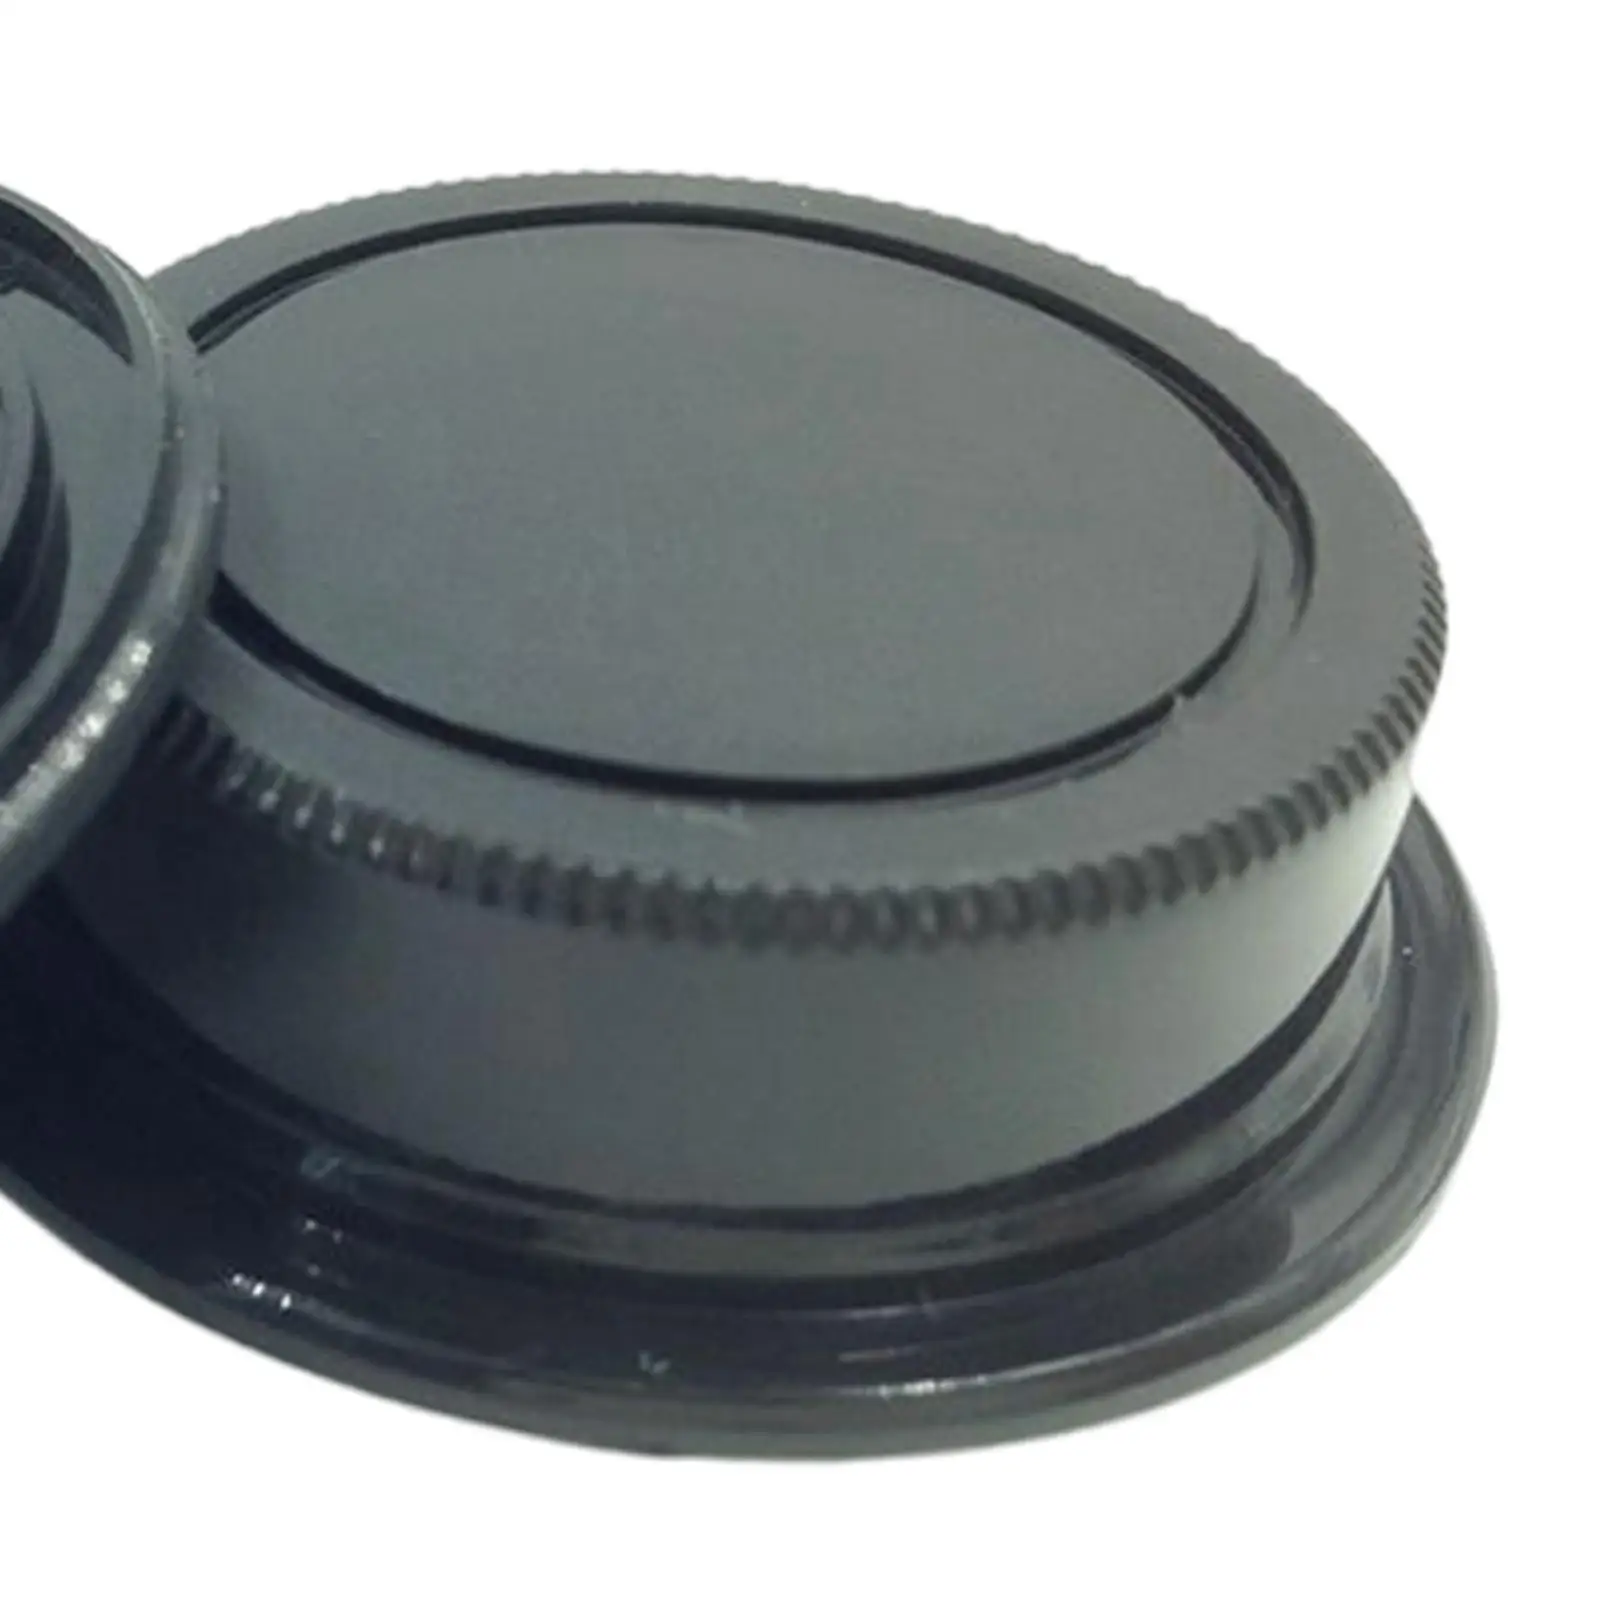 2 Pieces Camera Body and Rear Lens Caps Dustproof  Set Rear Lens Protector Cover for Cameras+Lenses